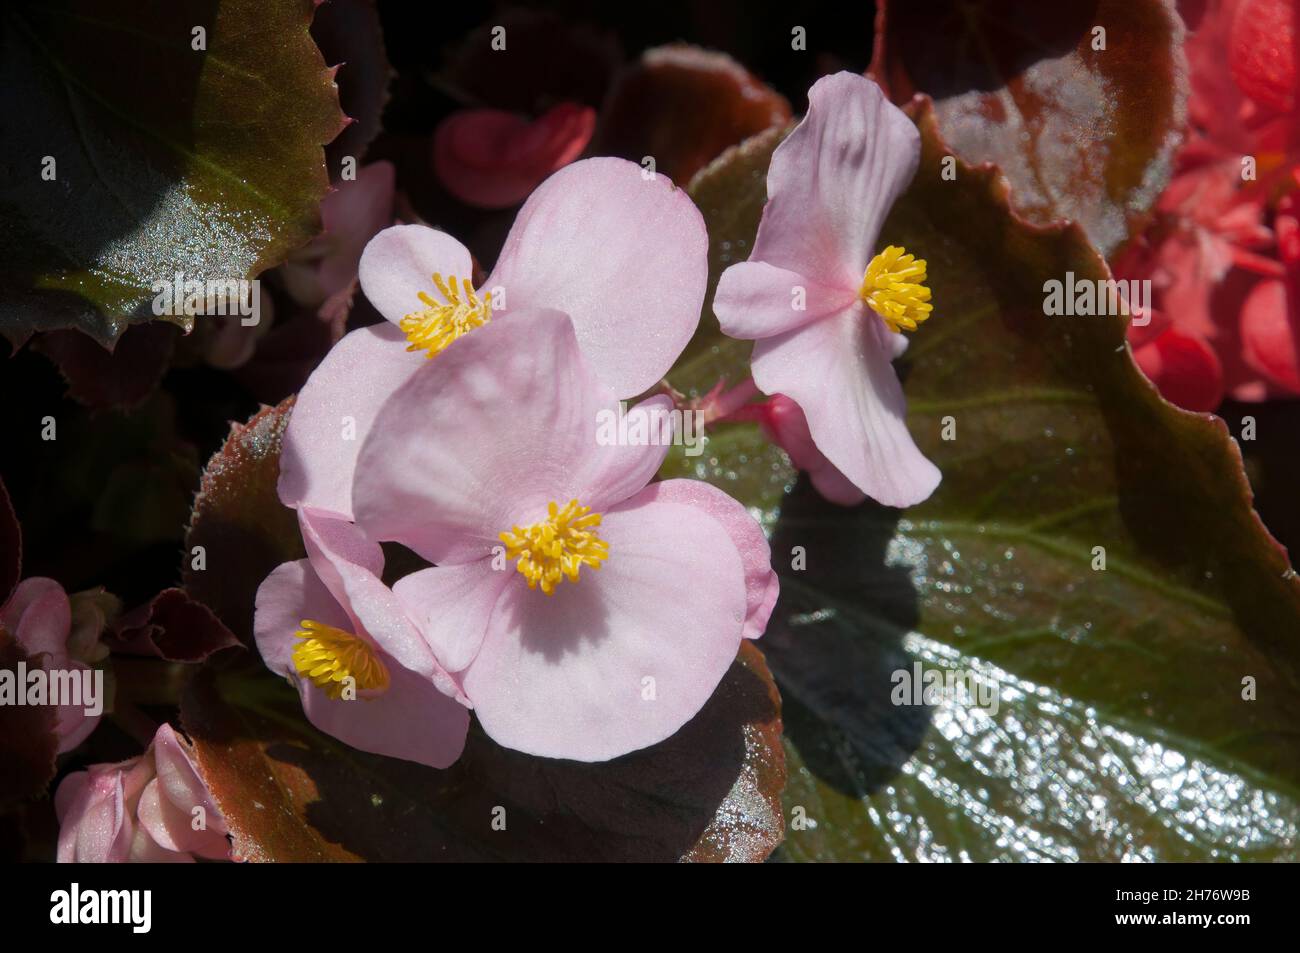 Sydney Australia, close-up of  a pale pink waxy begonia flowers Stock Photo